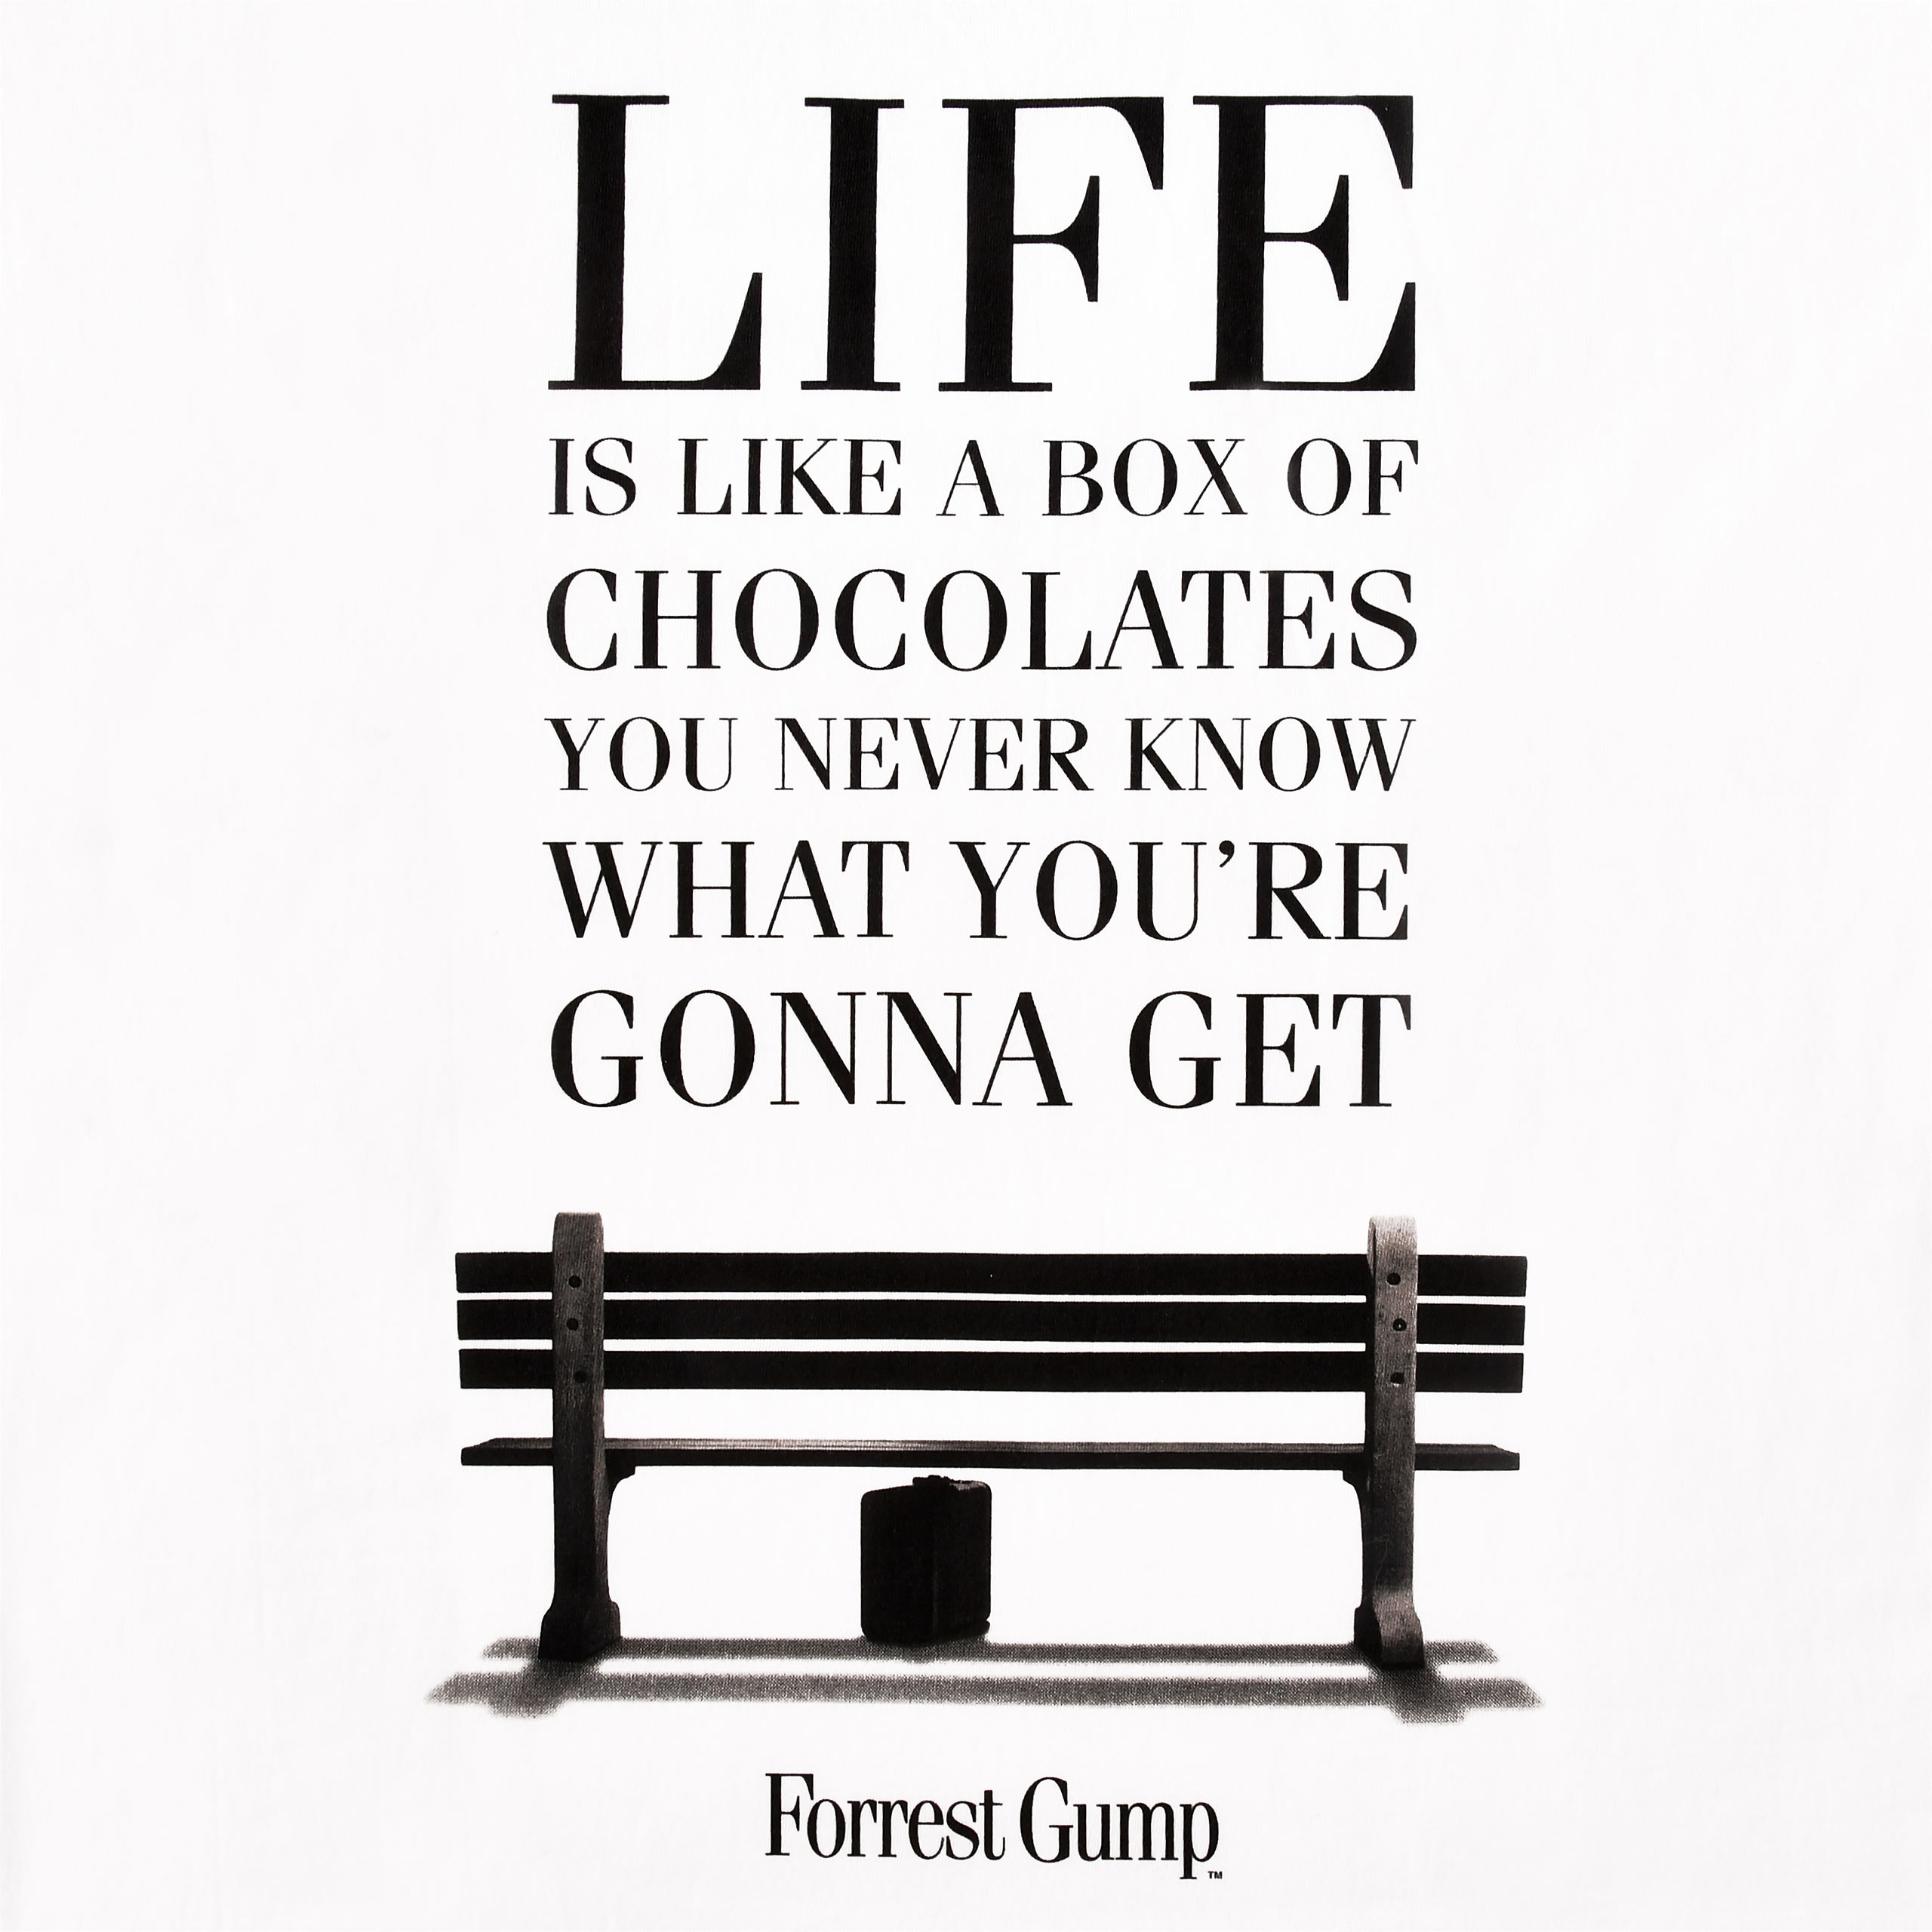 Forrest Gump - Life Is Like a Box of Chocolates T-Shirt white